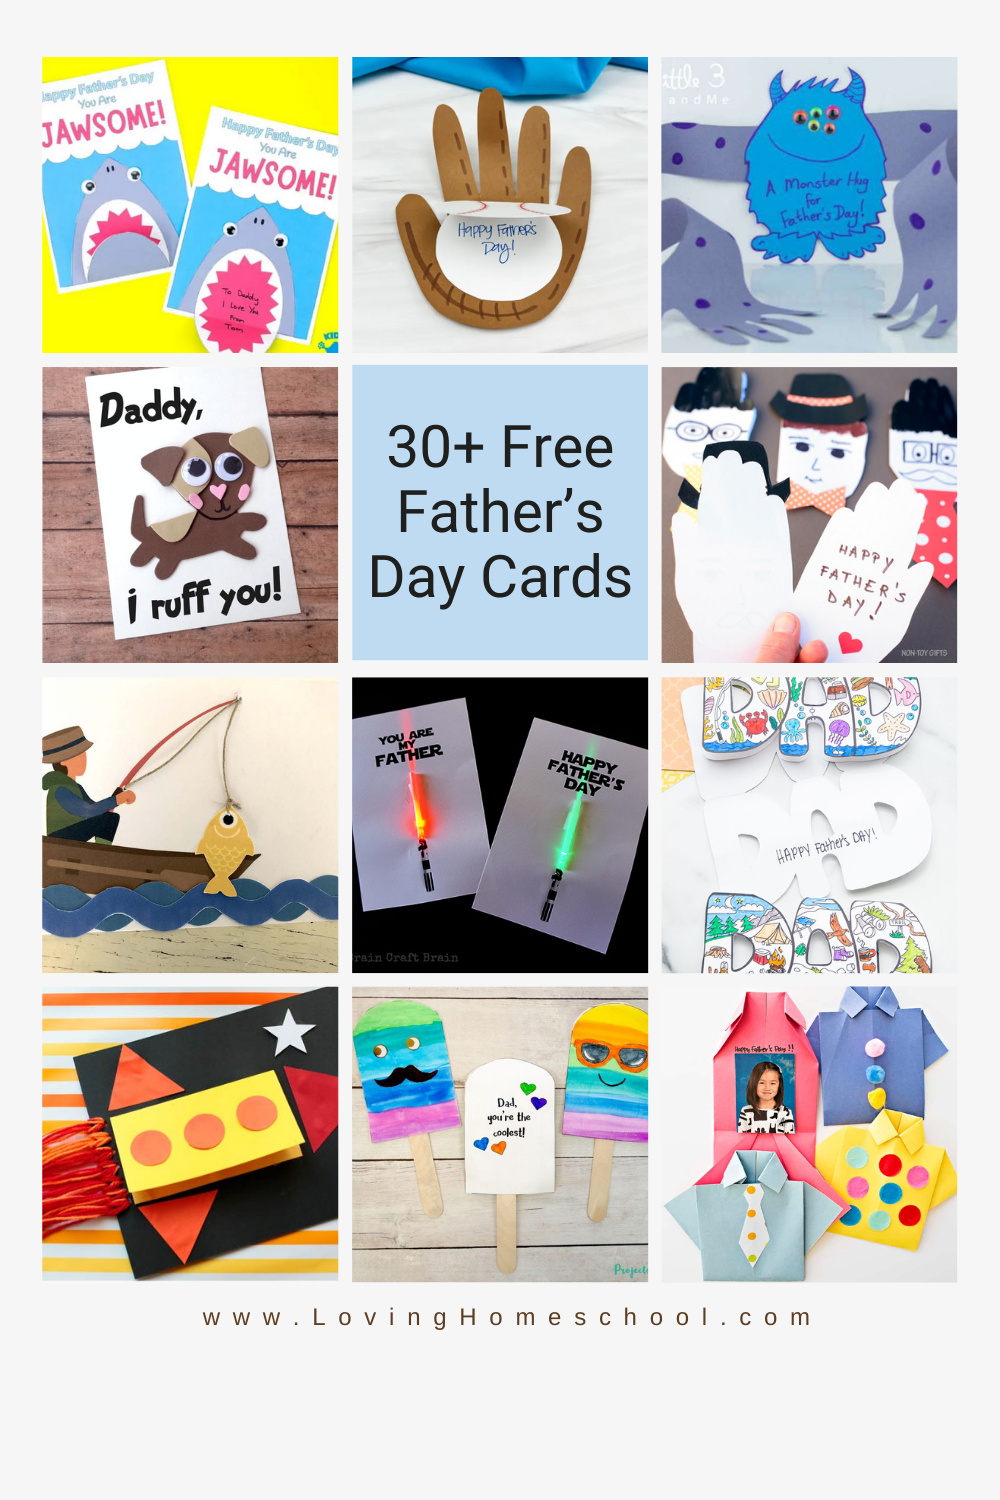 Over 30 Free Father’s Day Cards Pinterest pin